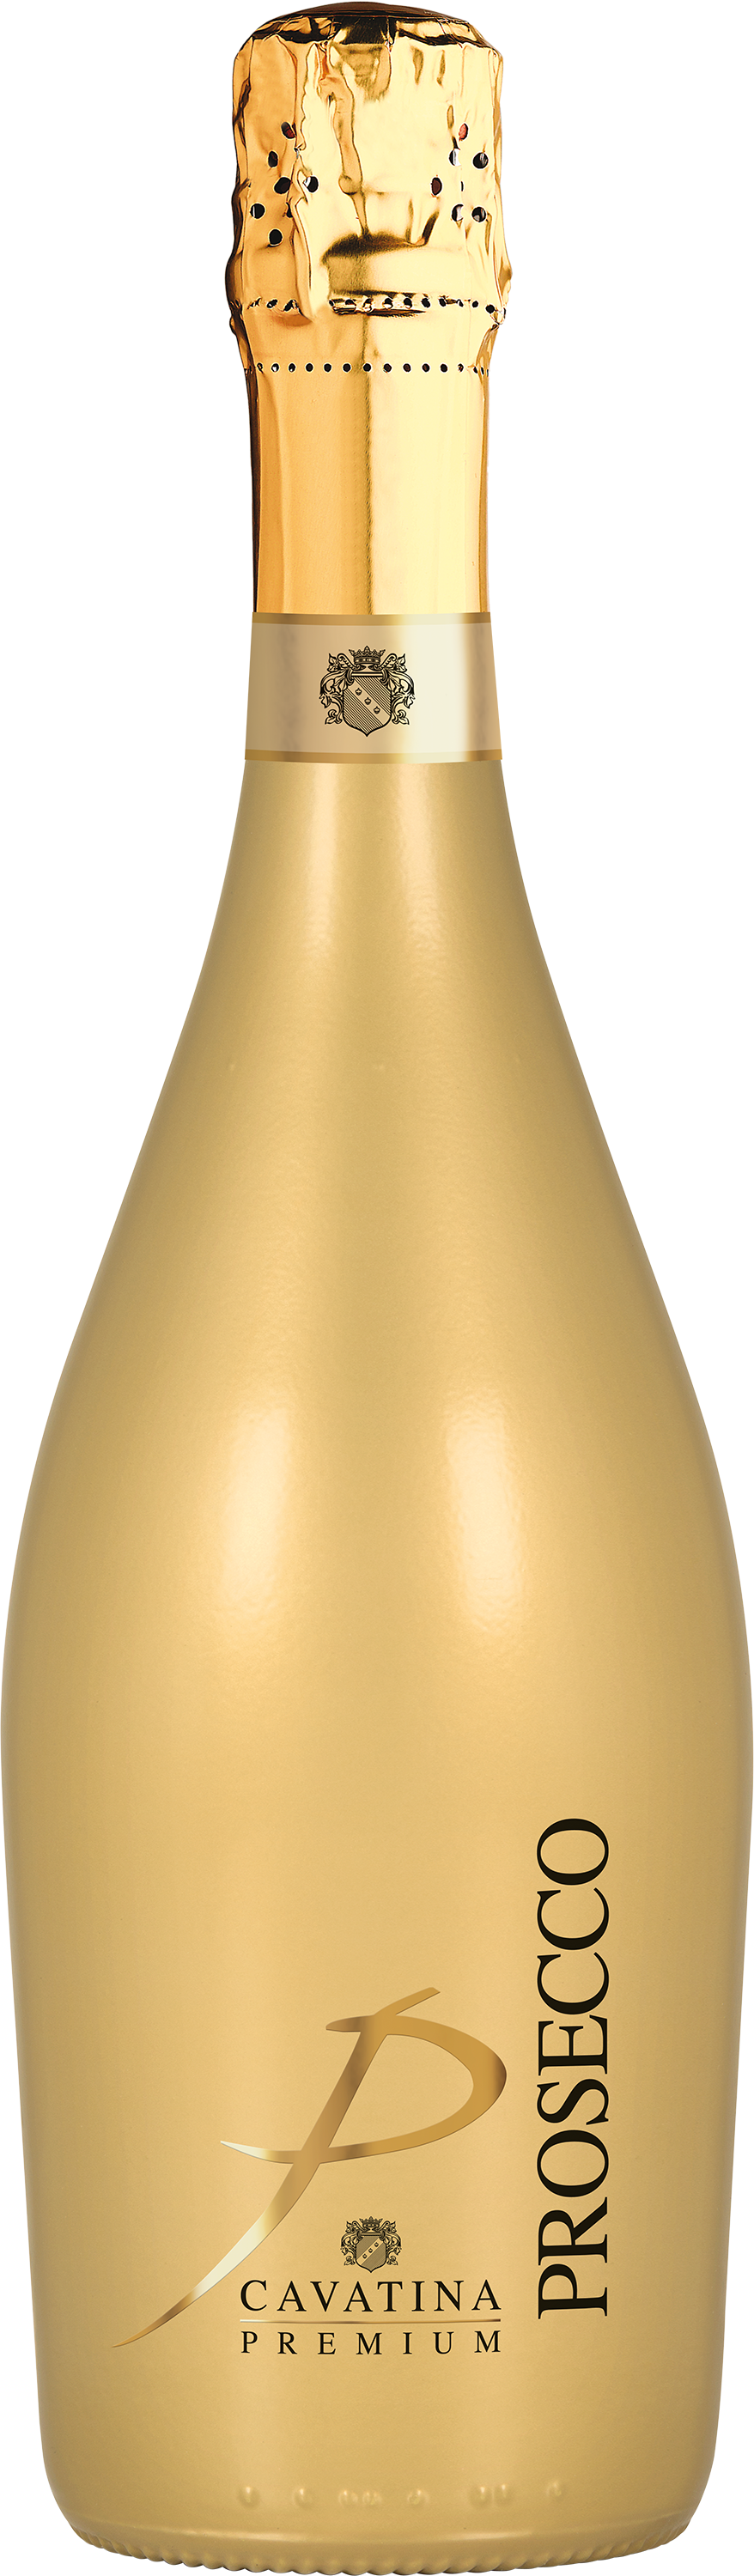 Cavatina Prosecco Spumante DOC 11% 75cl null - onesize - 1